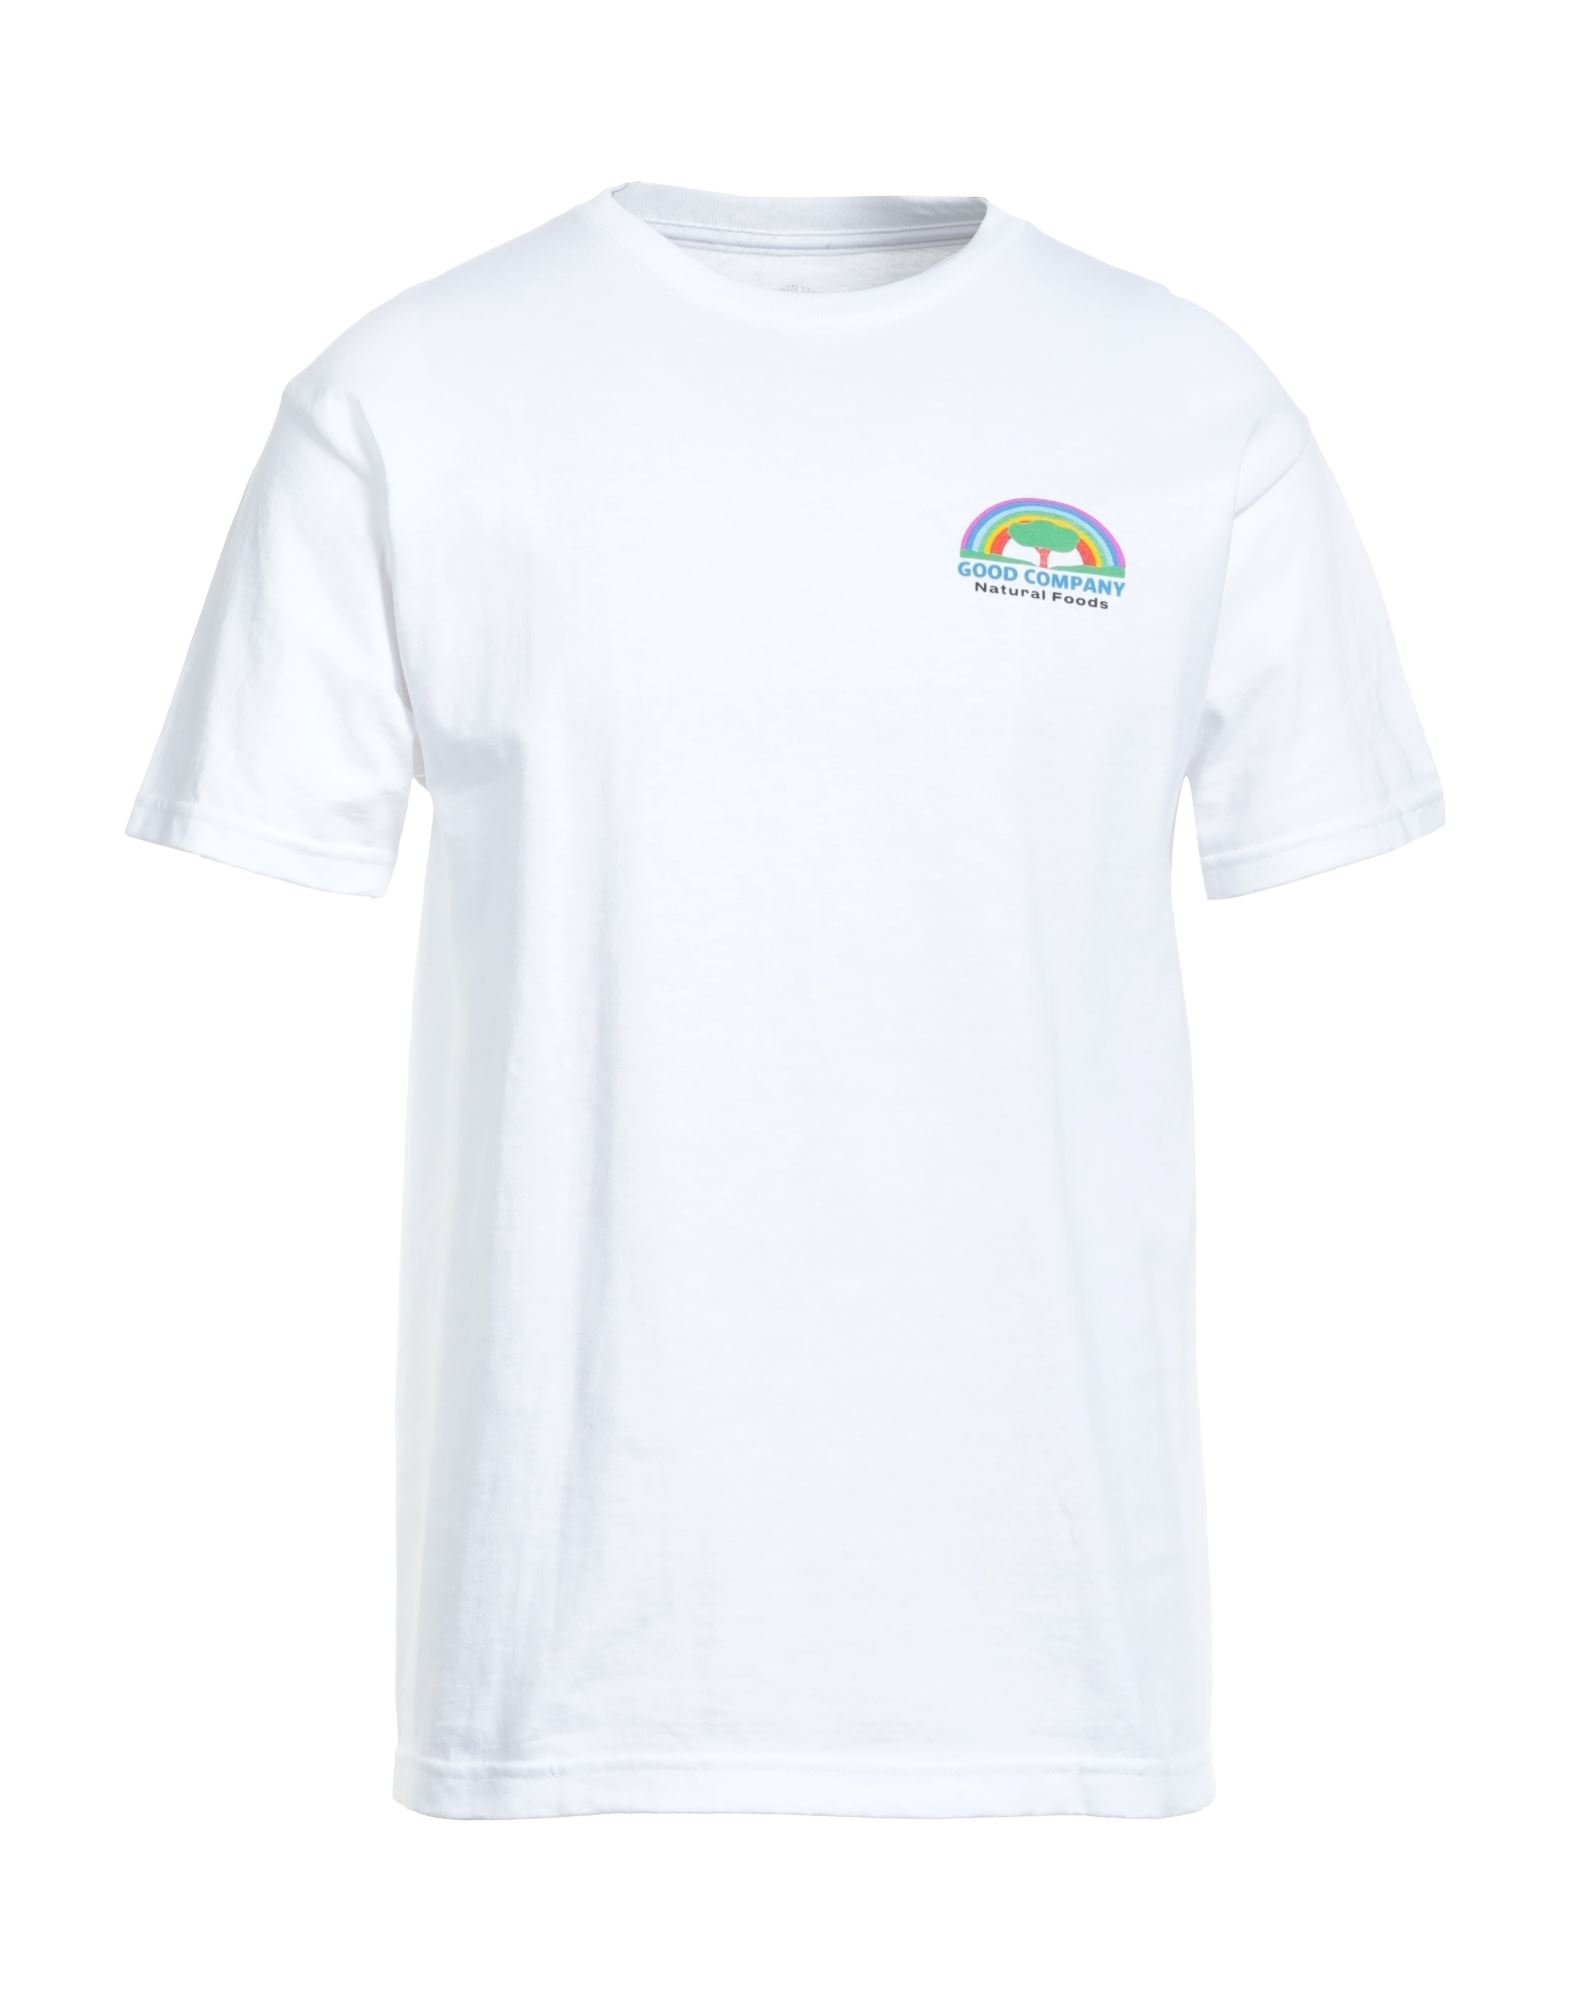 The Good Company T-shirts In White